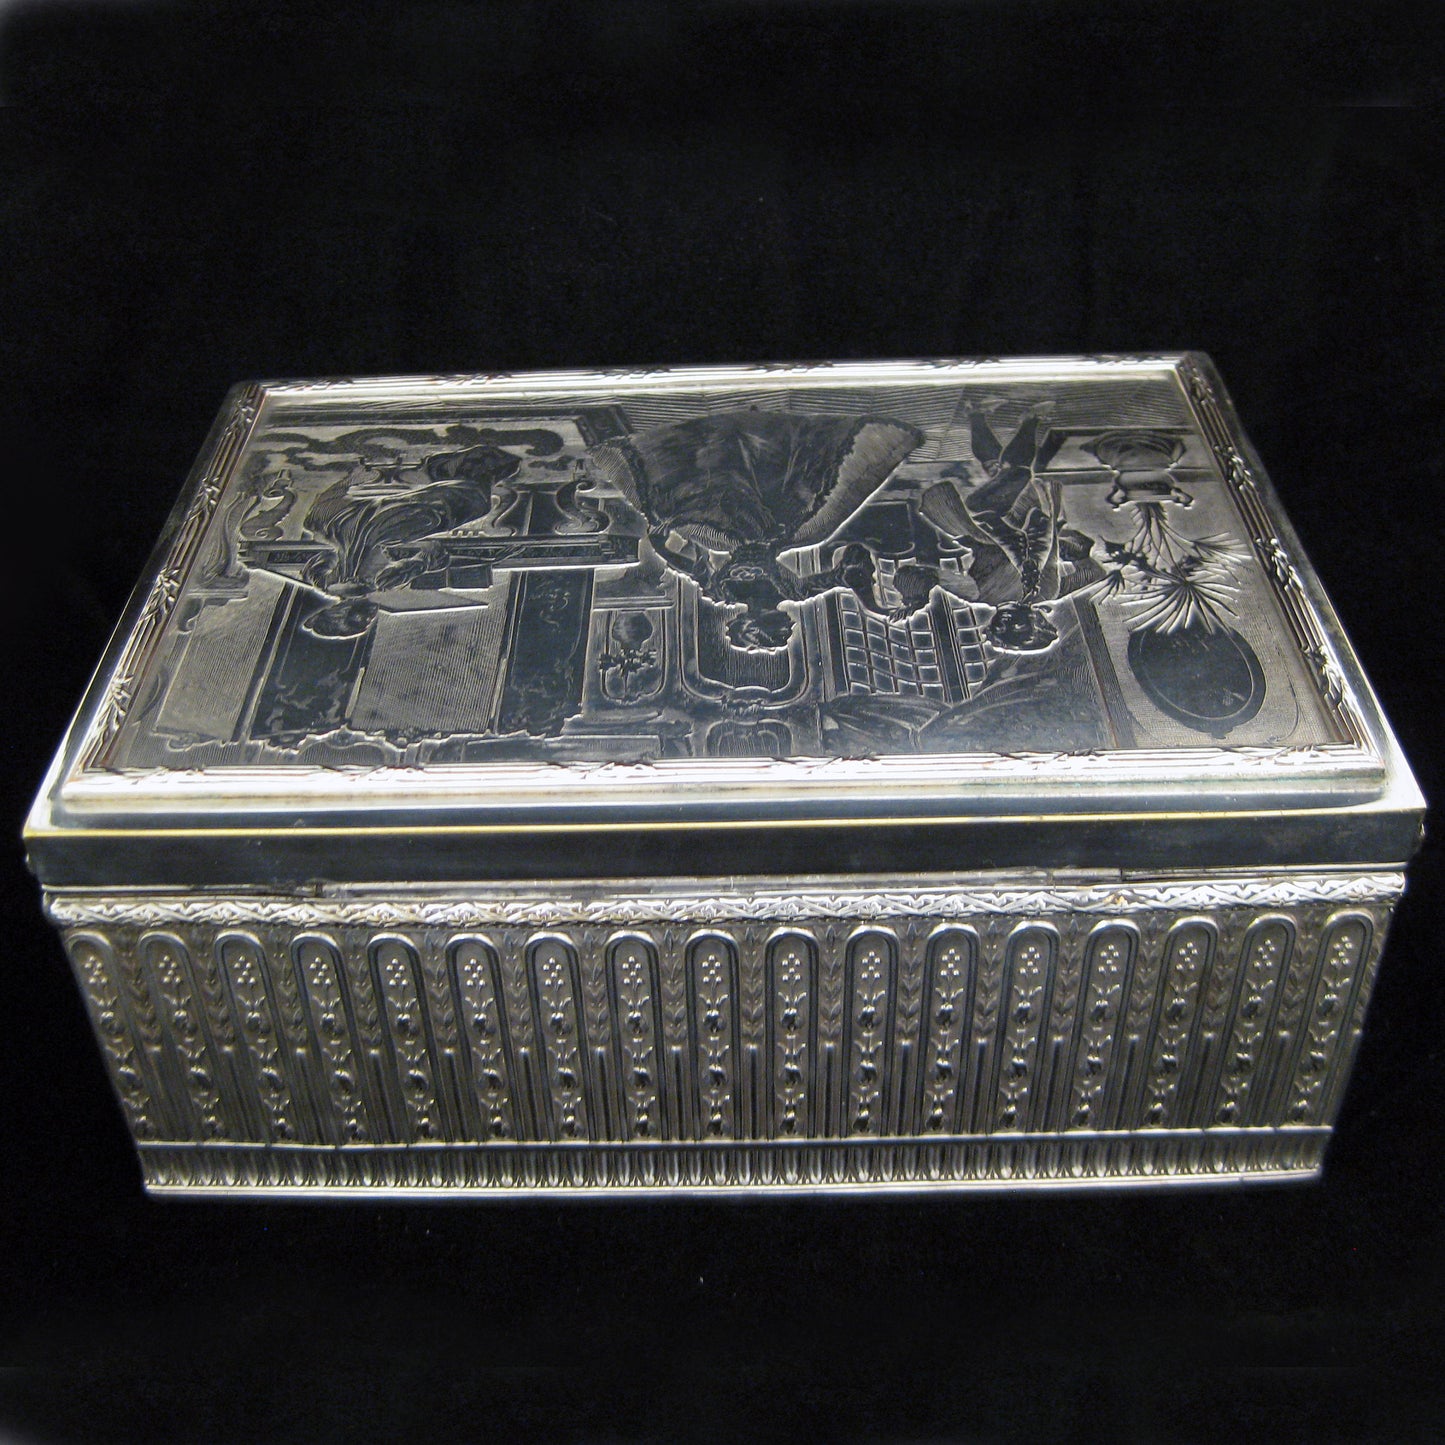 A silver plated Jewellery box by Palais Royale.